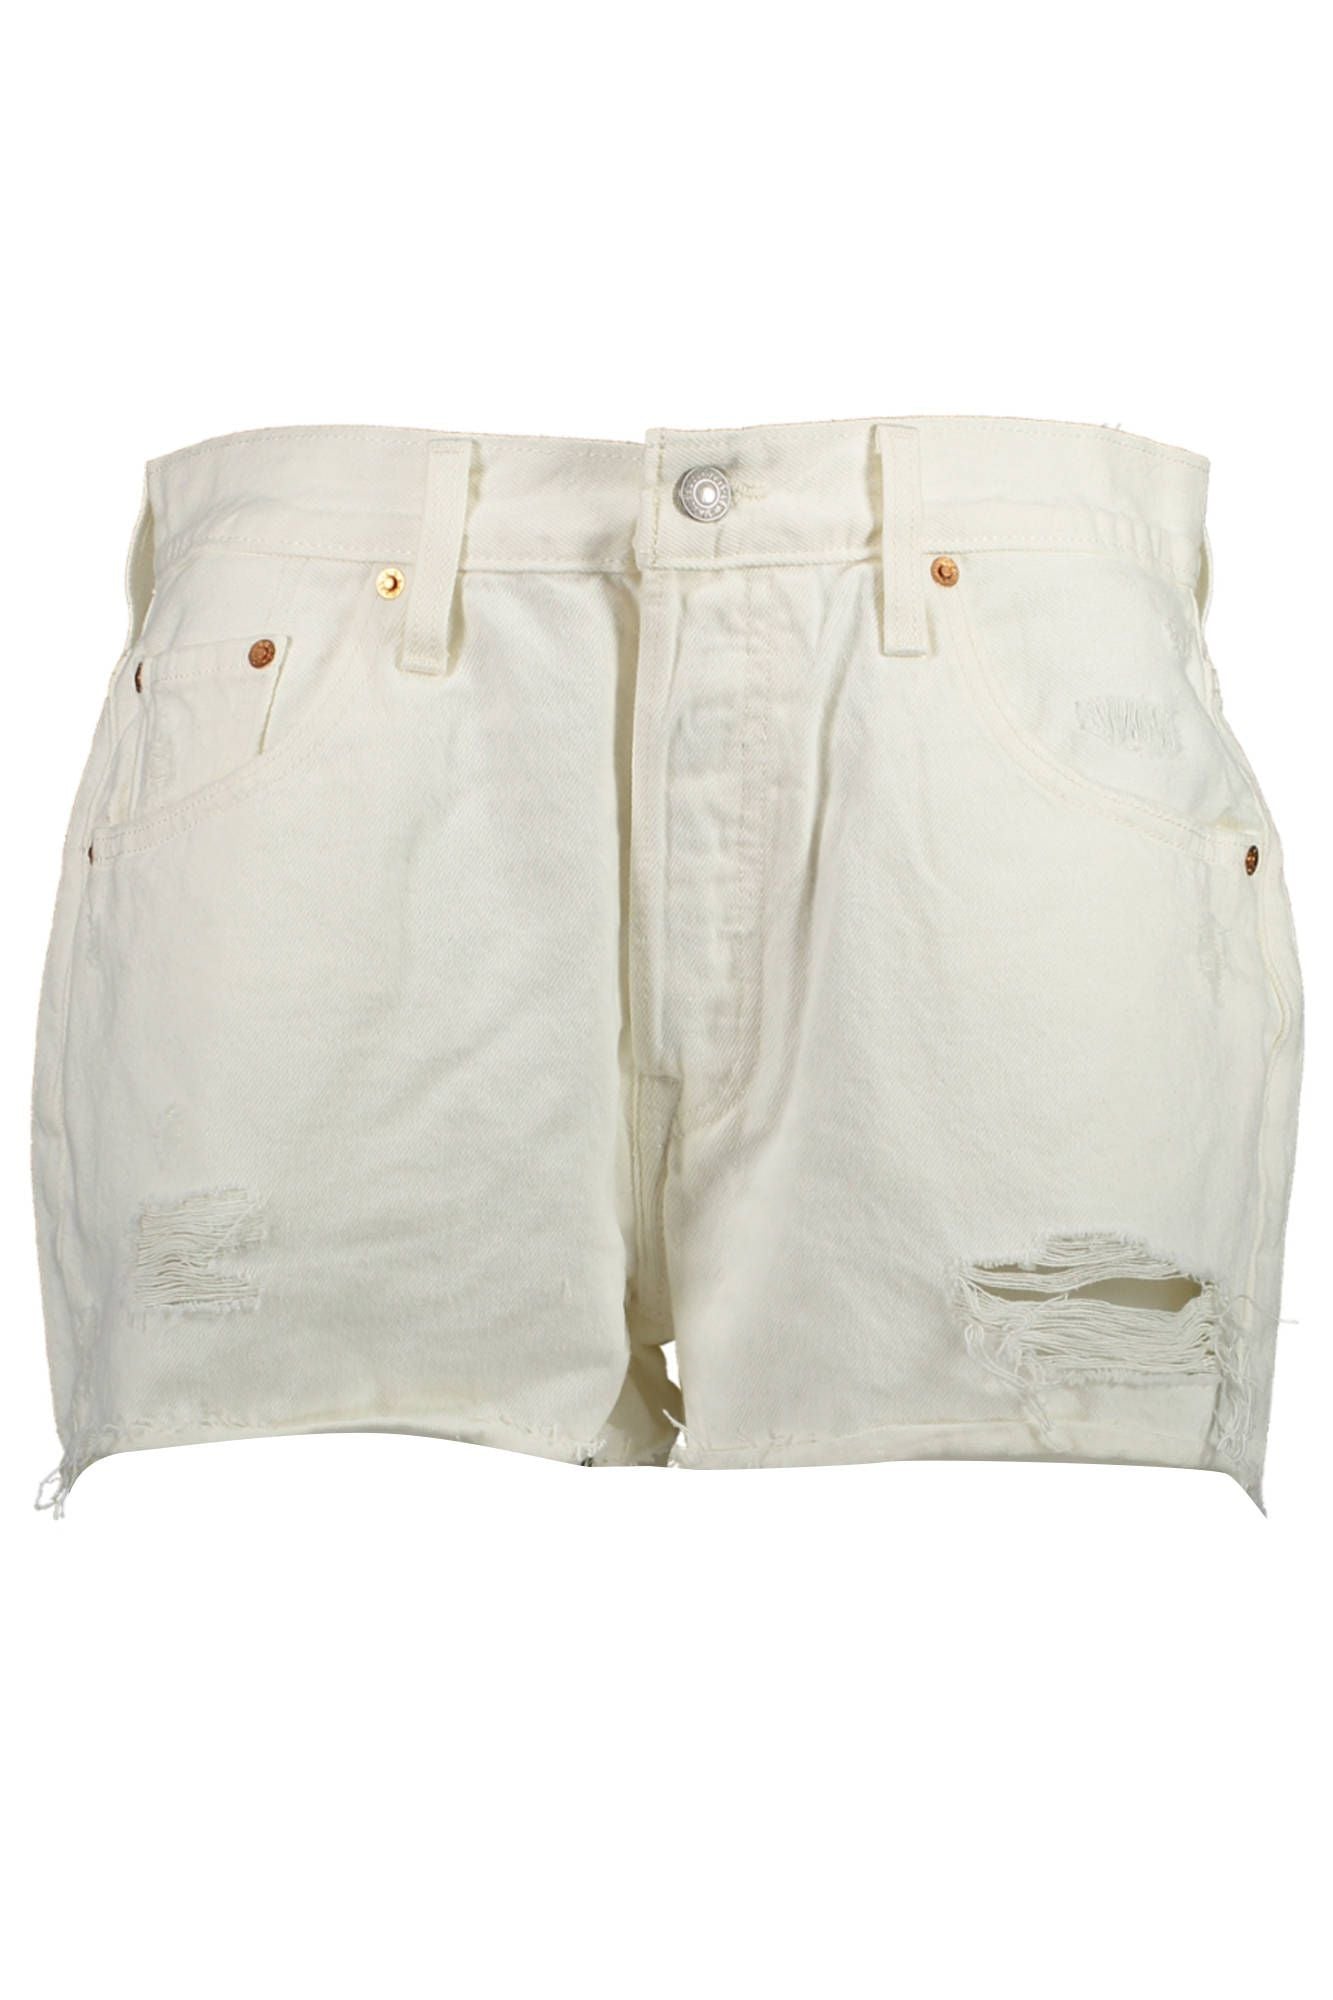 Chic White Denim Shorts with Classic Appeal - Divitiae Glamour